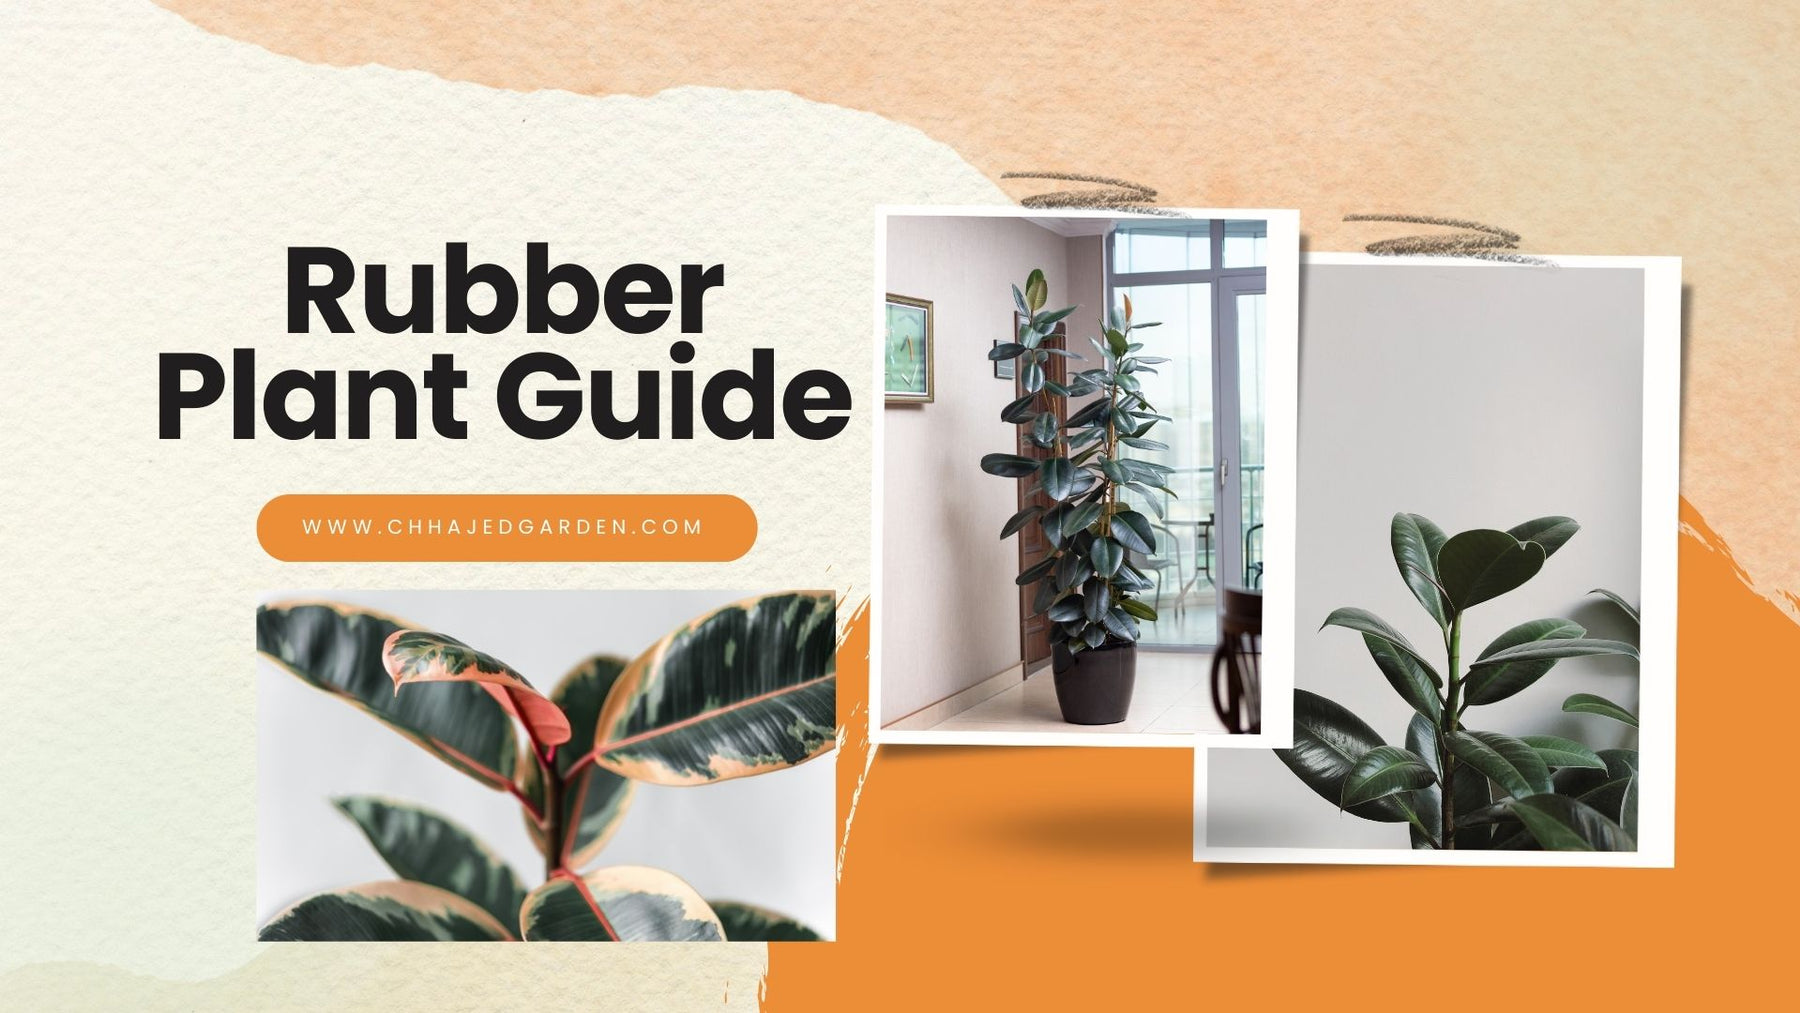 Rubber Plant Guide: Everything You Should Know About Growing Rubber Plants